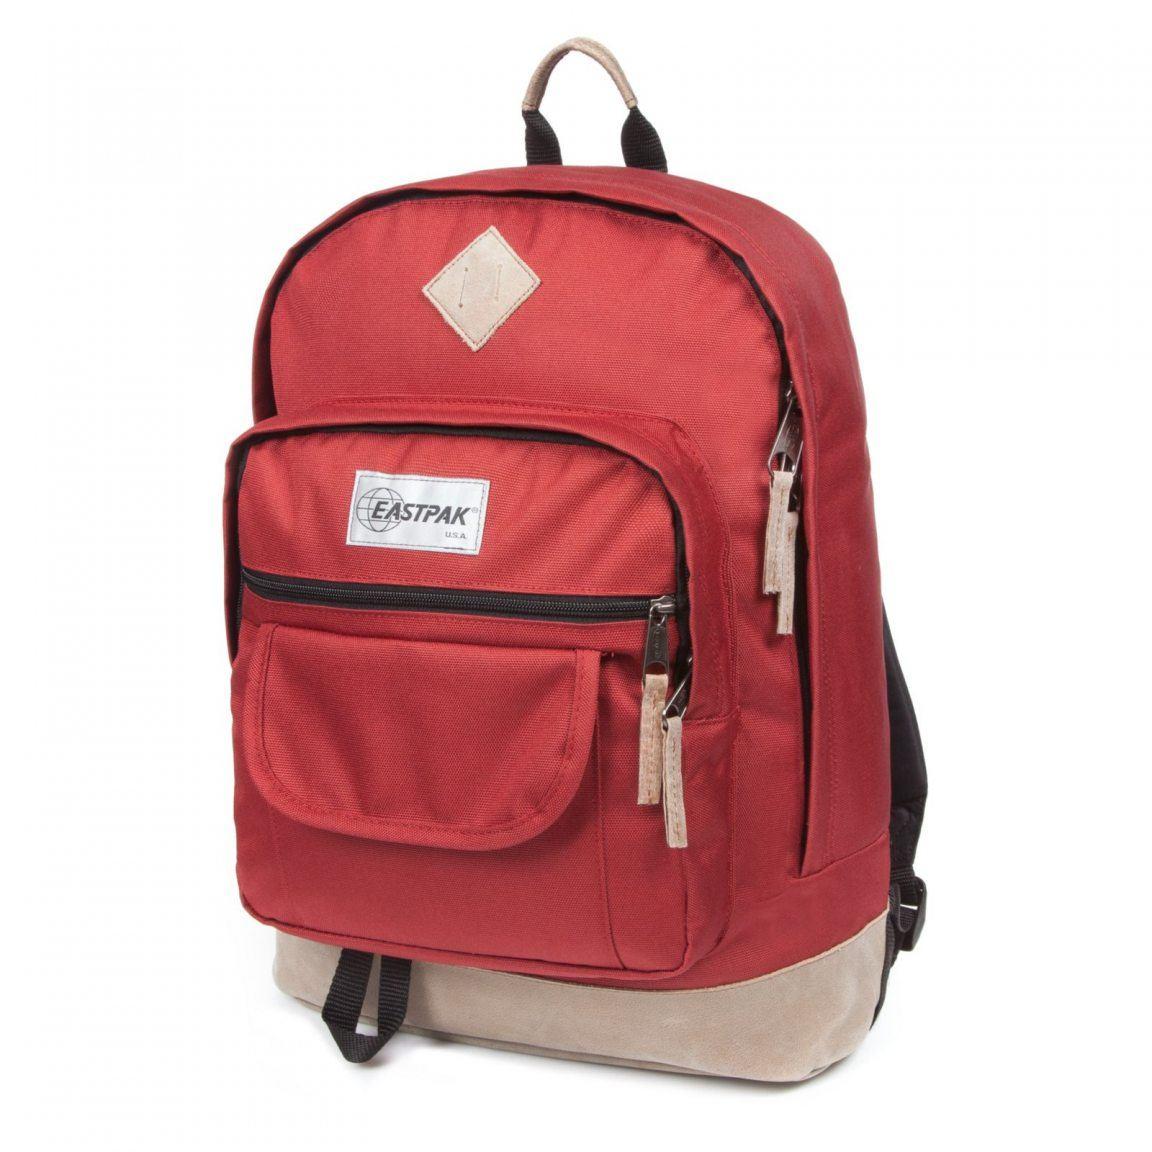 Eastpak Laptoprucksack Sugarbrush into the out rusty